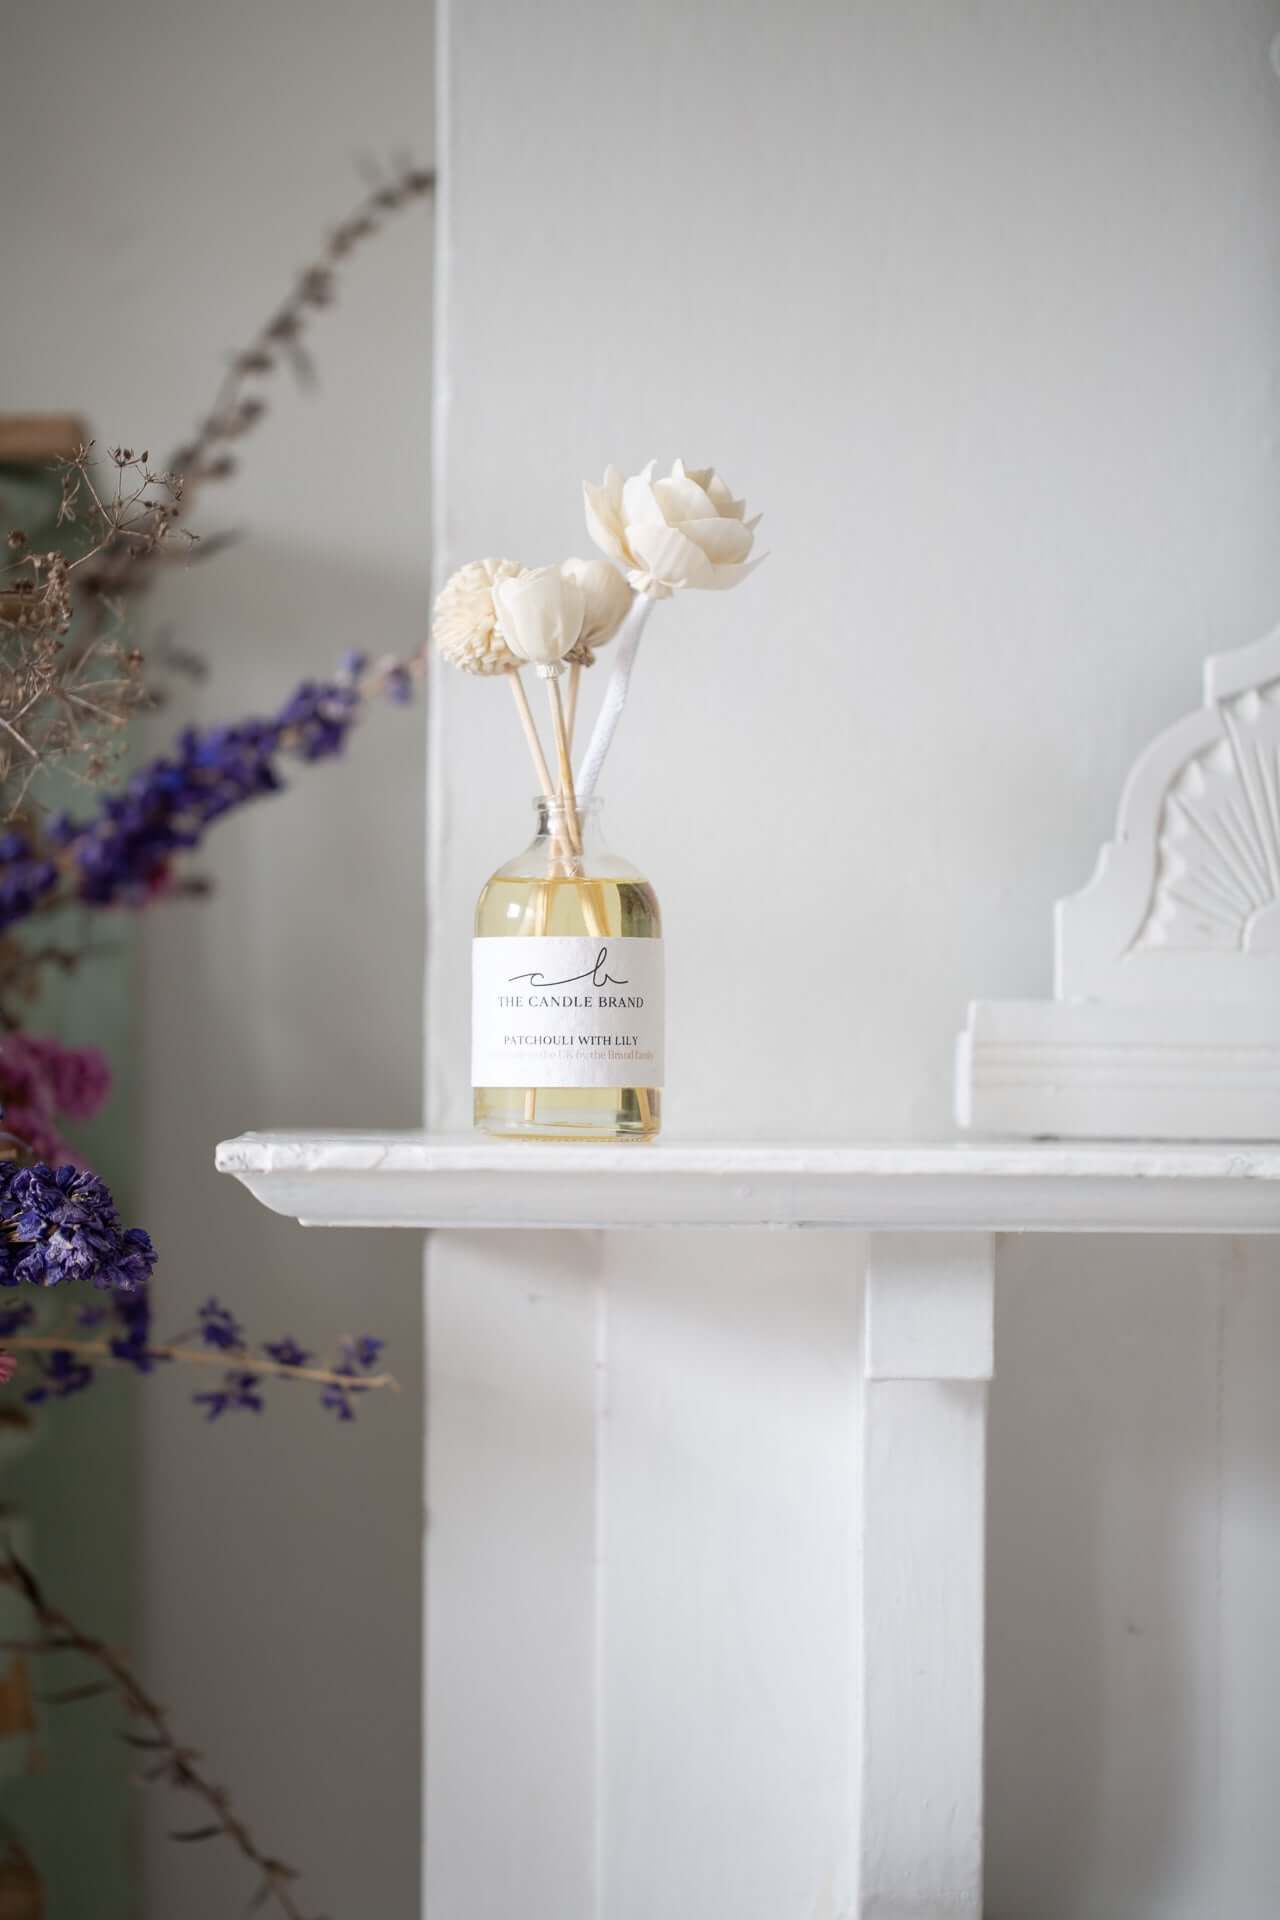 Eco-Friendly Primrose with Clove Flower Diffuser The Candle Brand Home Fragrance